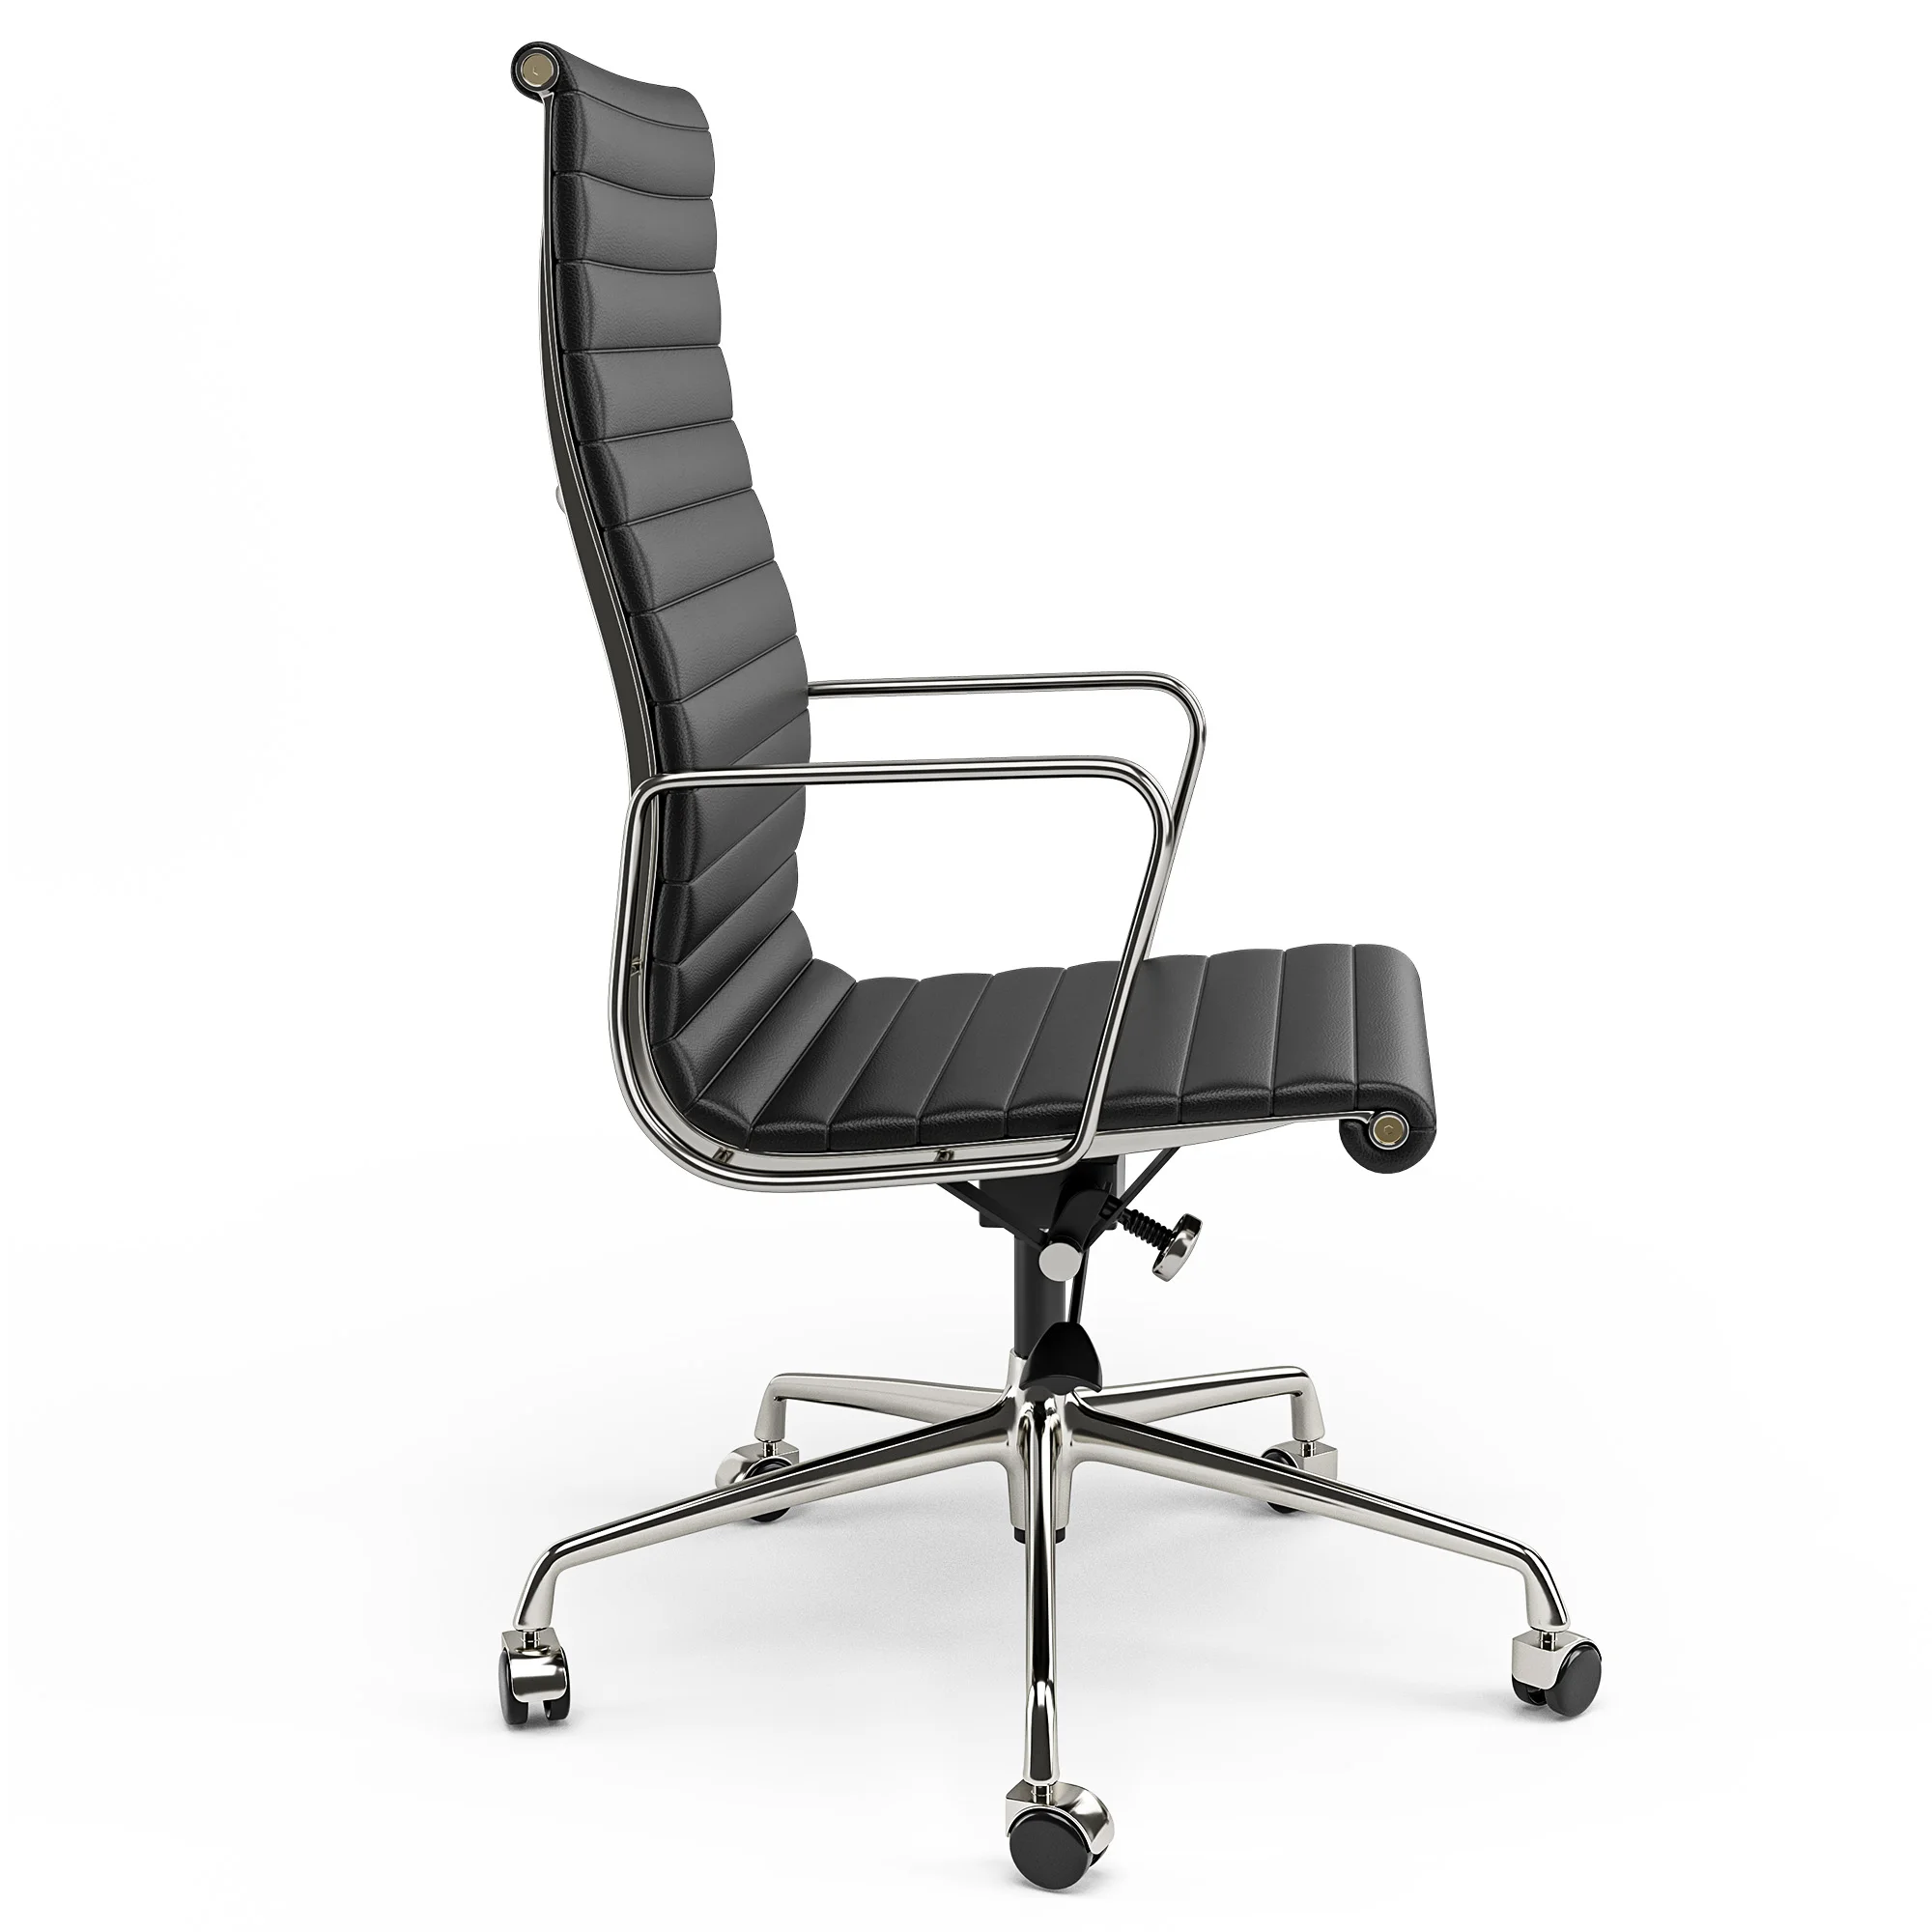 Adjustable High Back Ribbed Office Chair Black Genuine Leather Ergonomic Computer Desk Chair with Aluminium Alloy Frame